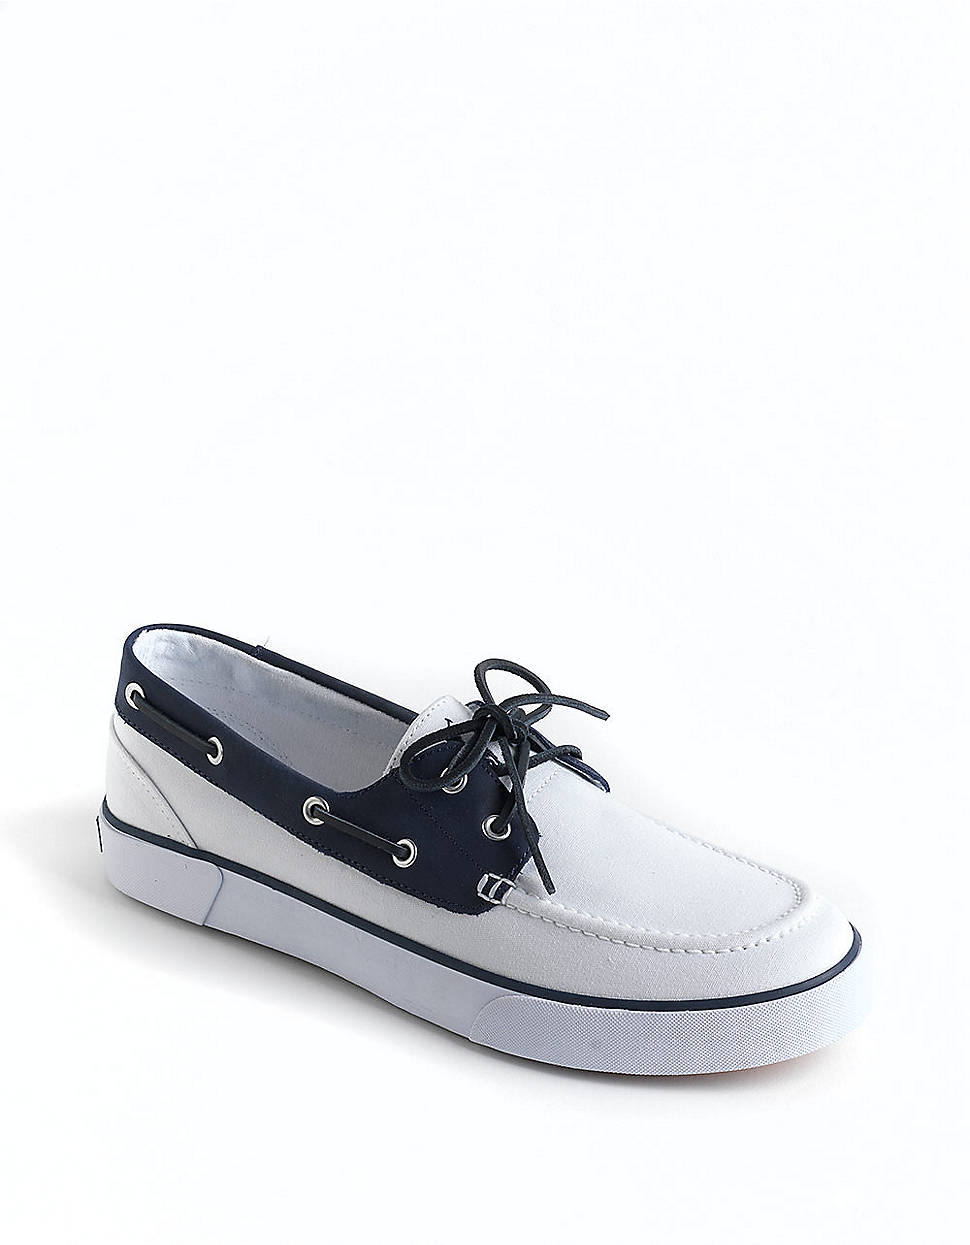 white and blue polo shoes